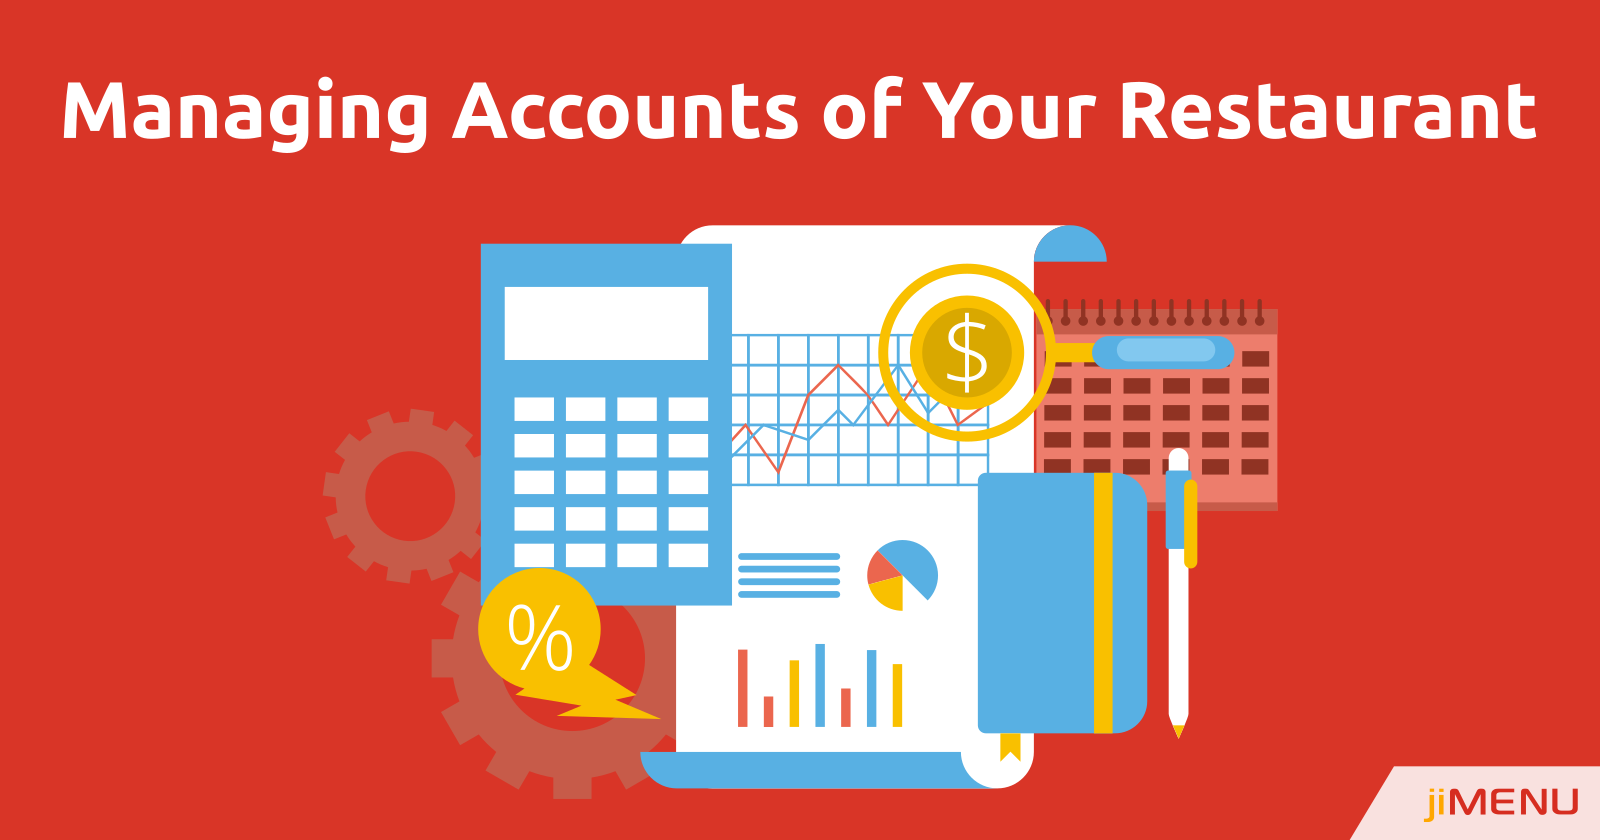 Efficiently Managing Finance and Accounts of Your Restaurant